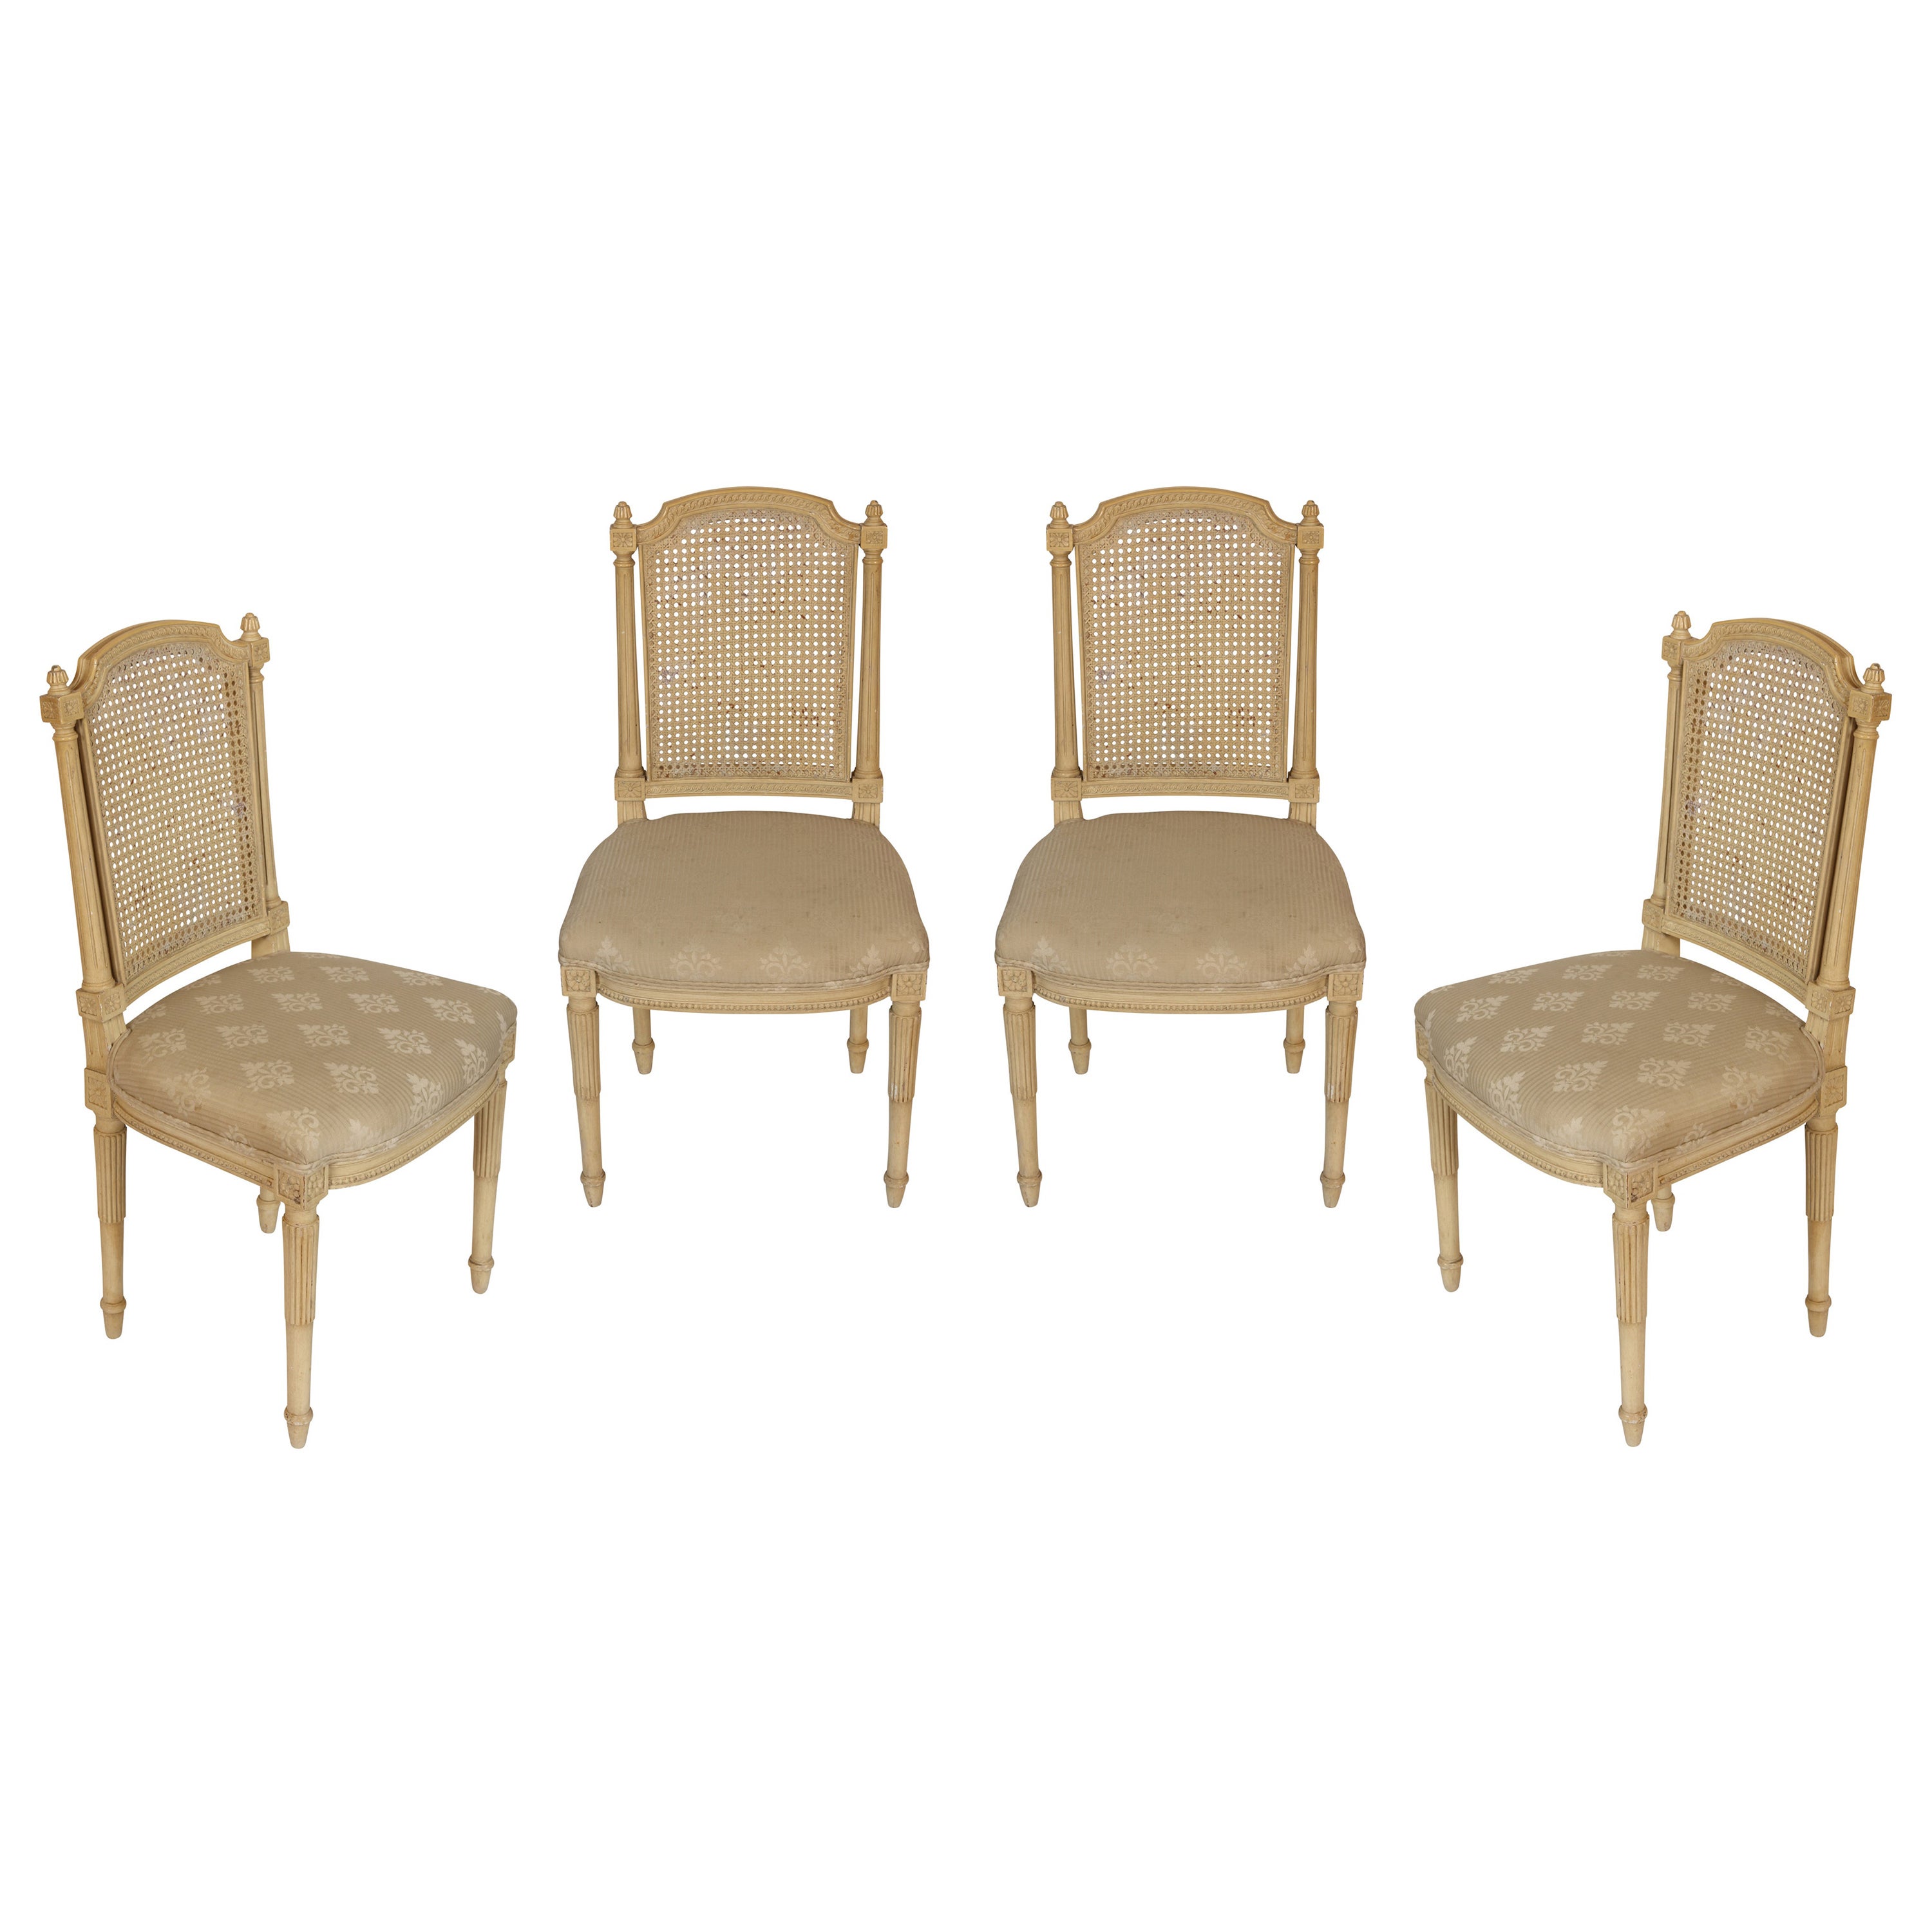 Set of Four Caned Back Dining Chairs with Upholstered Seats